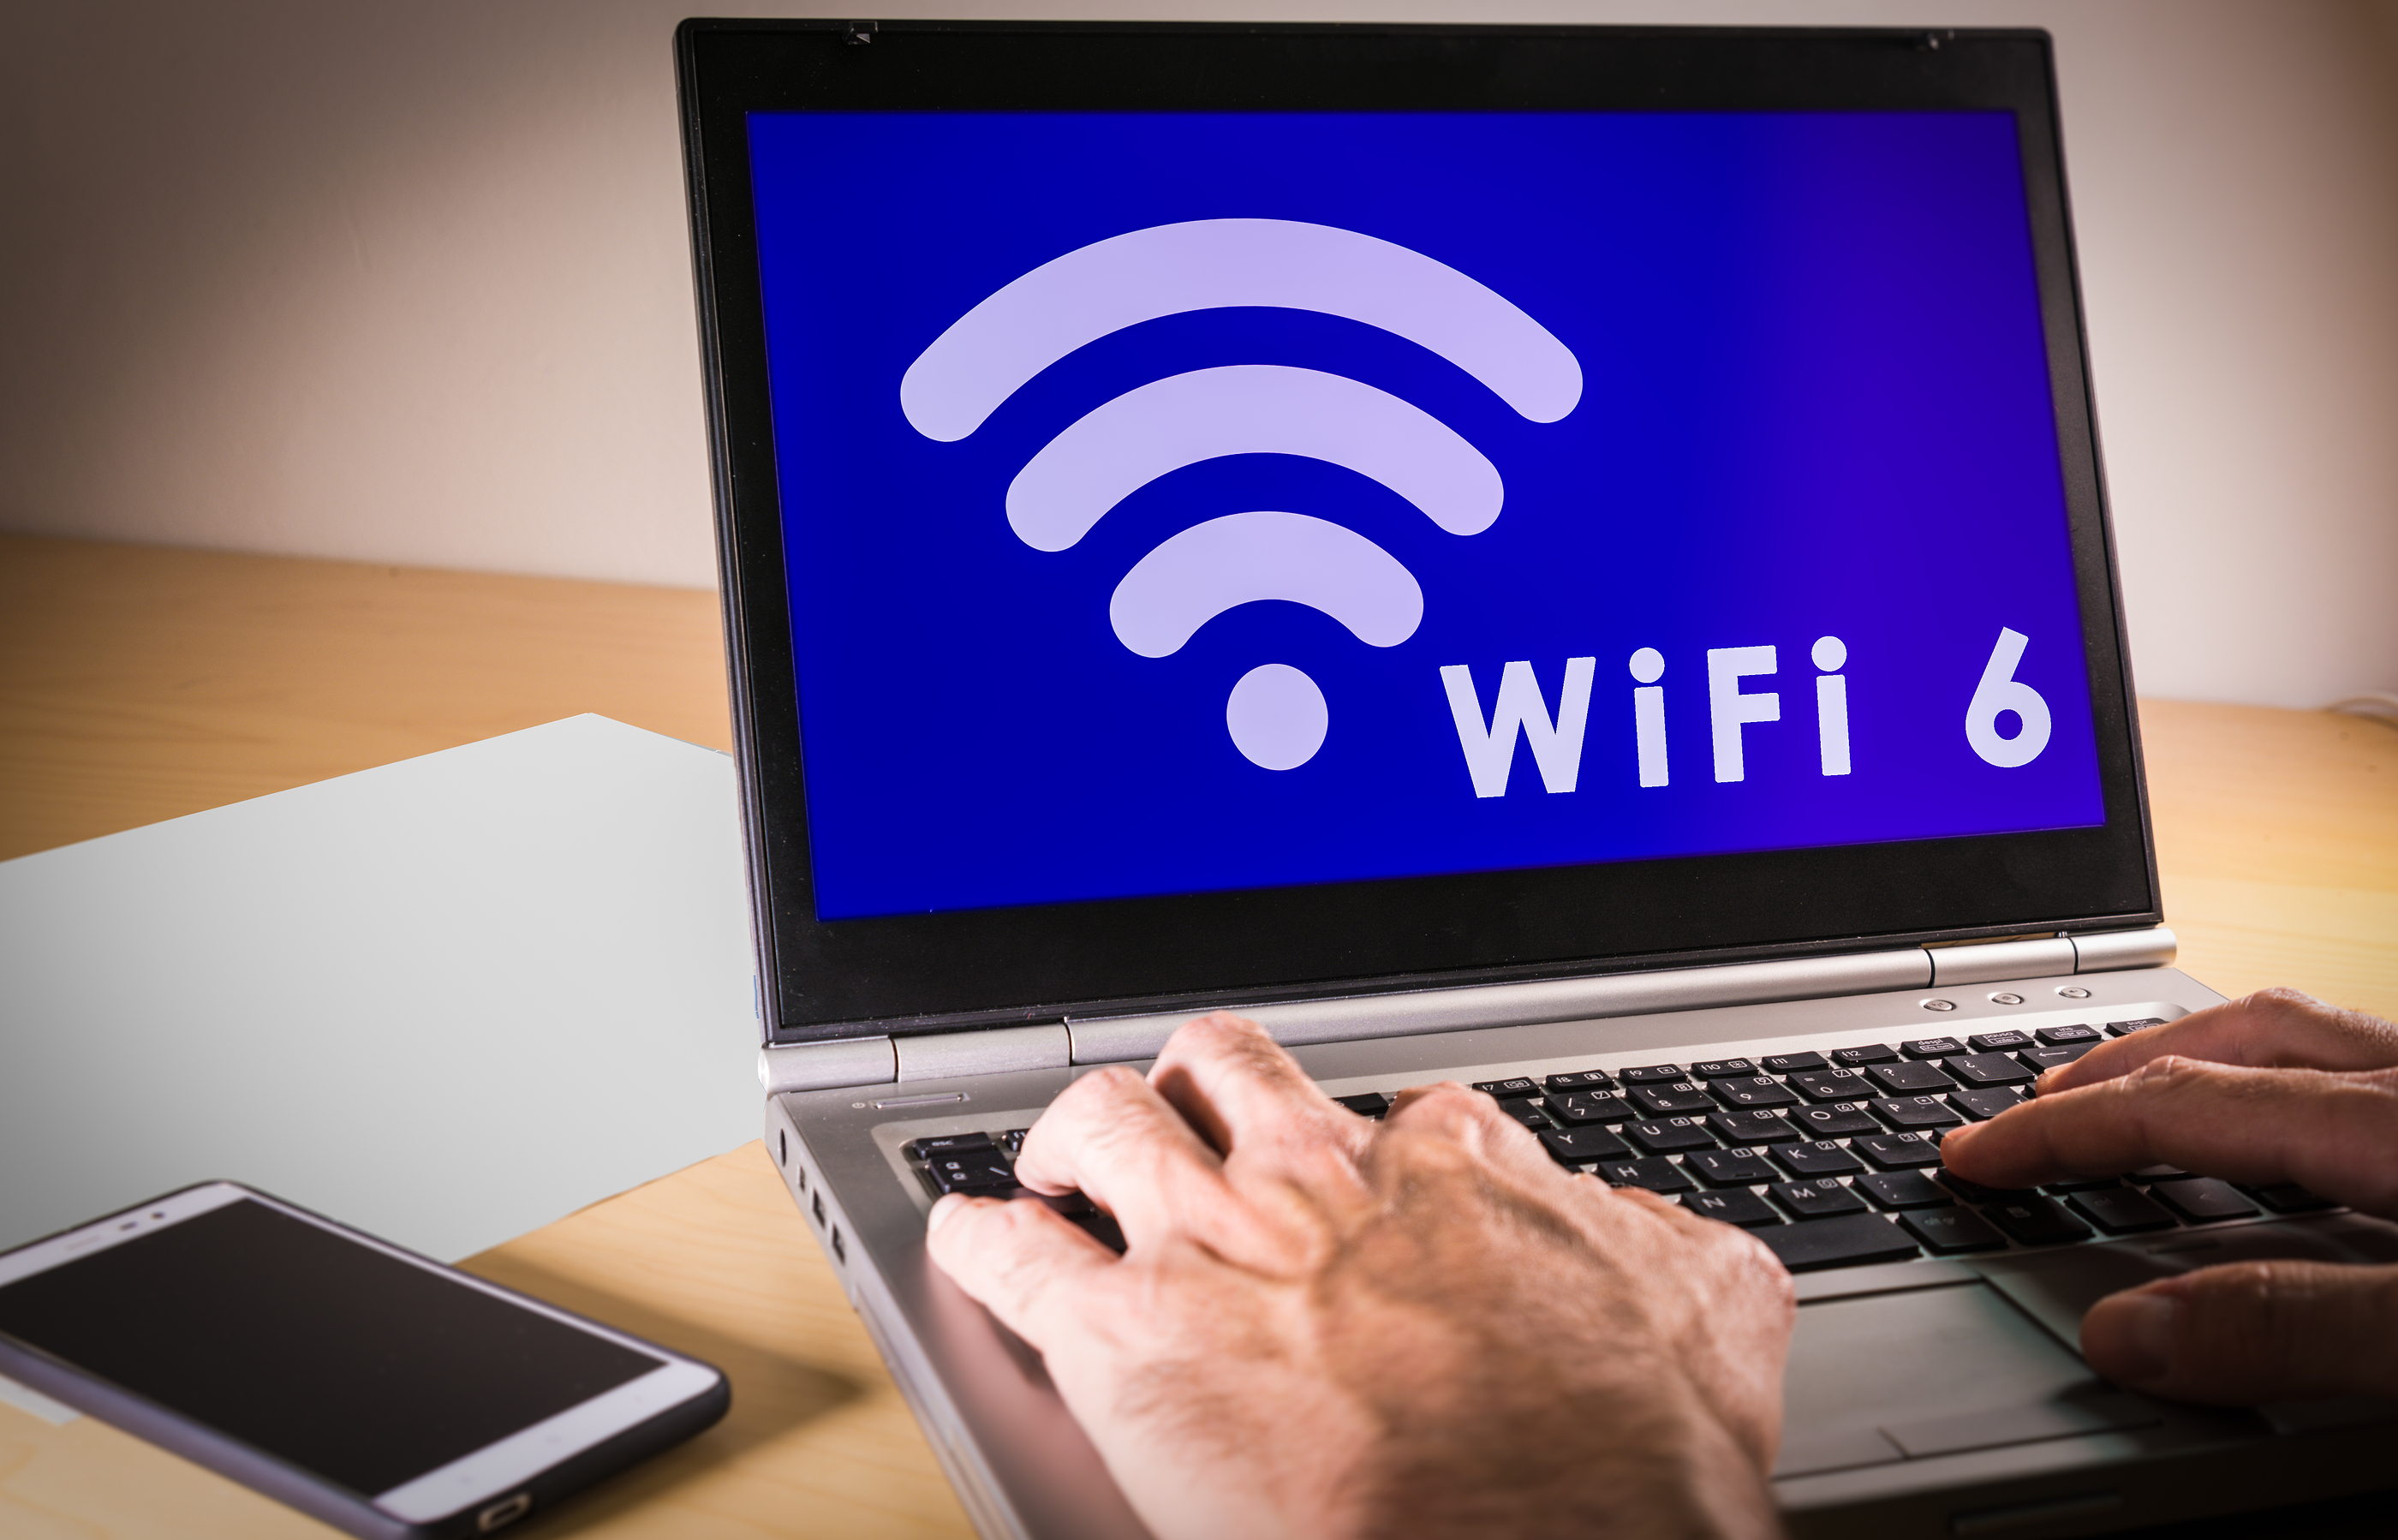 Wi-Fi 6 (802.11ax) Is Officially Out! Now What? Learn All About this Improved Wi-Fi Standard